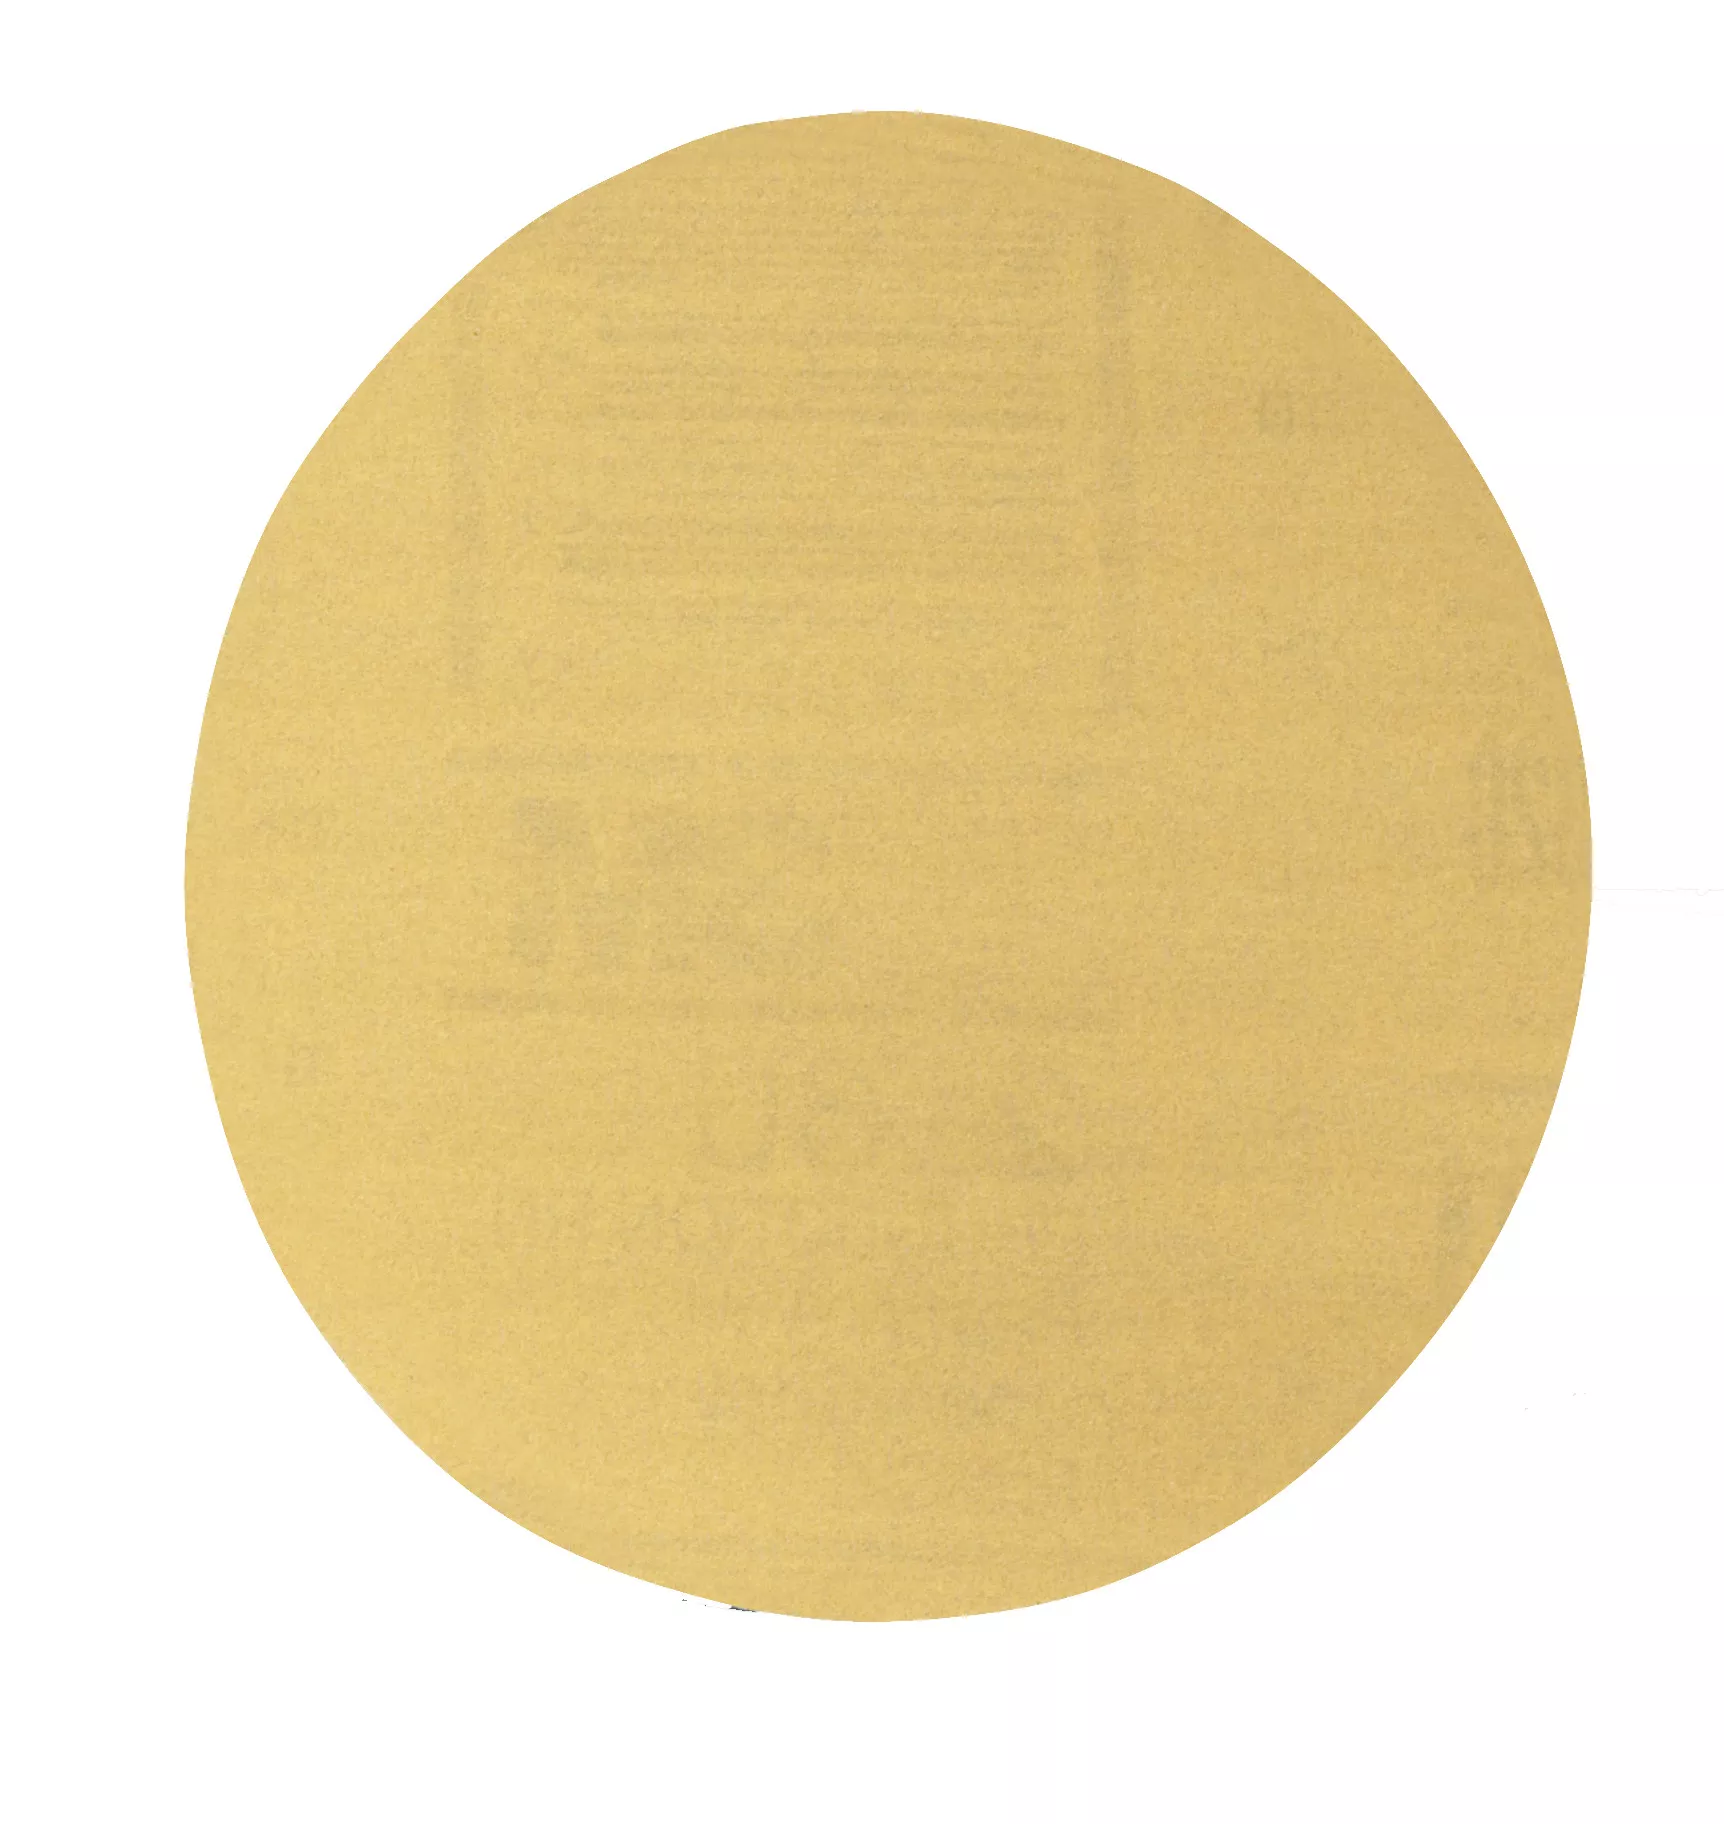 Product Number 236U | 3M™ Stikit™ Gold Disc Roll